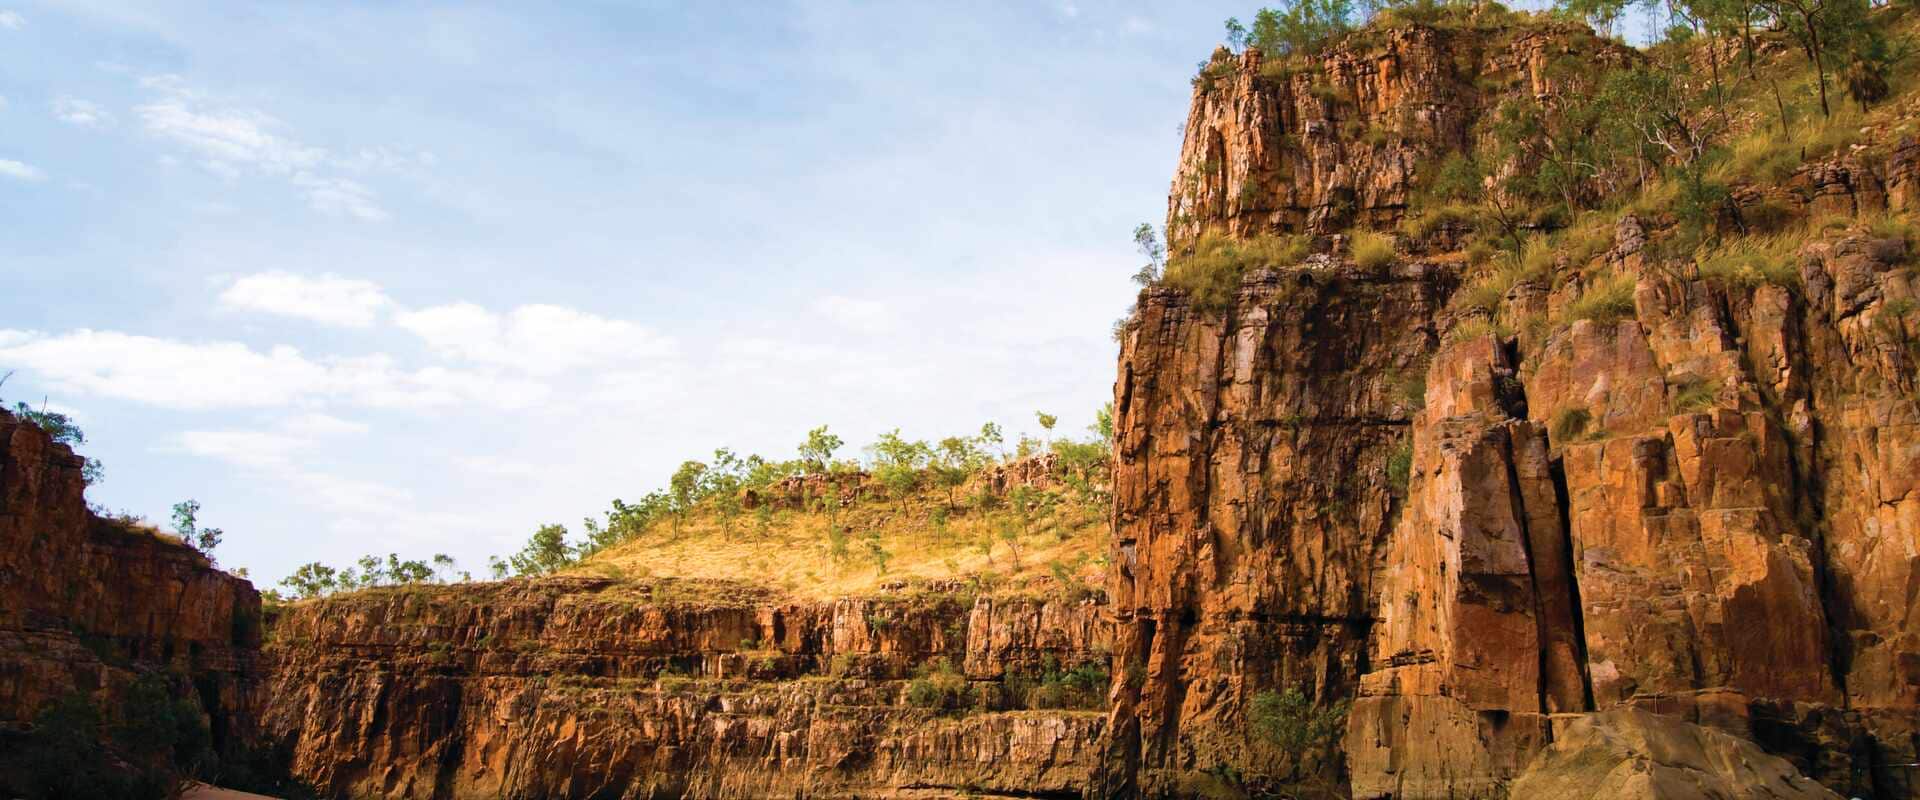 Glimpse at the red ancient cliffs of Katherine Gorge in the Northern Territory.